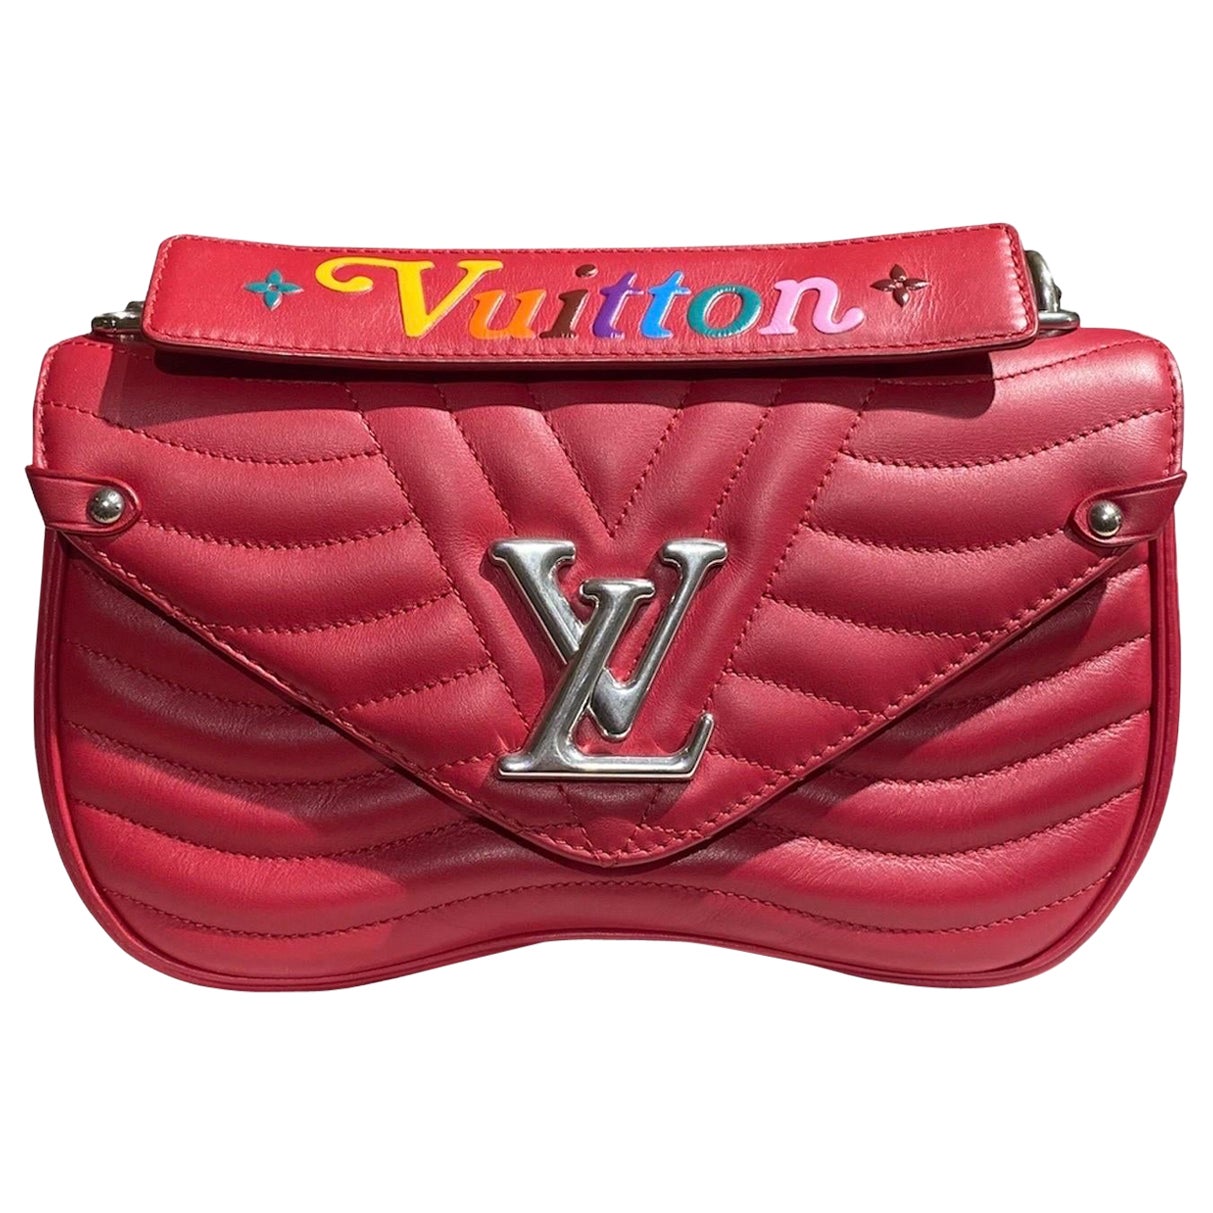 Louis Vuitton New Wave Red